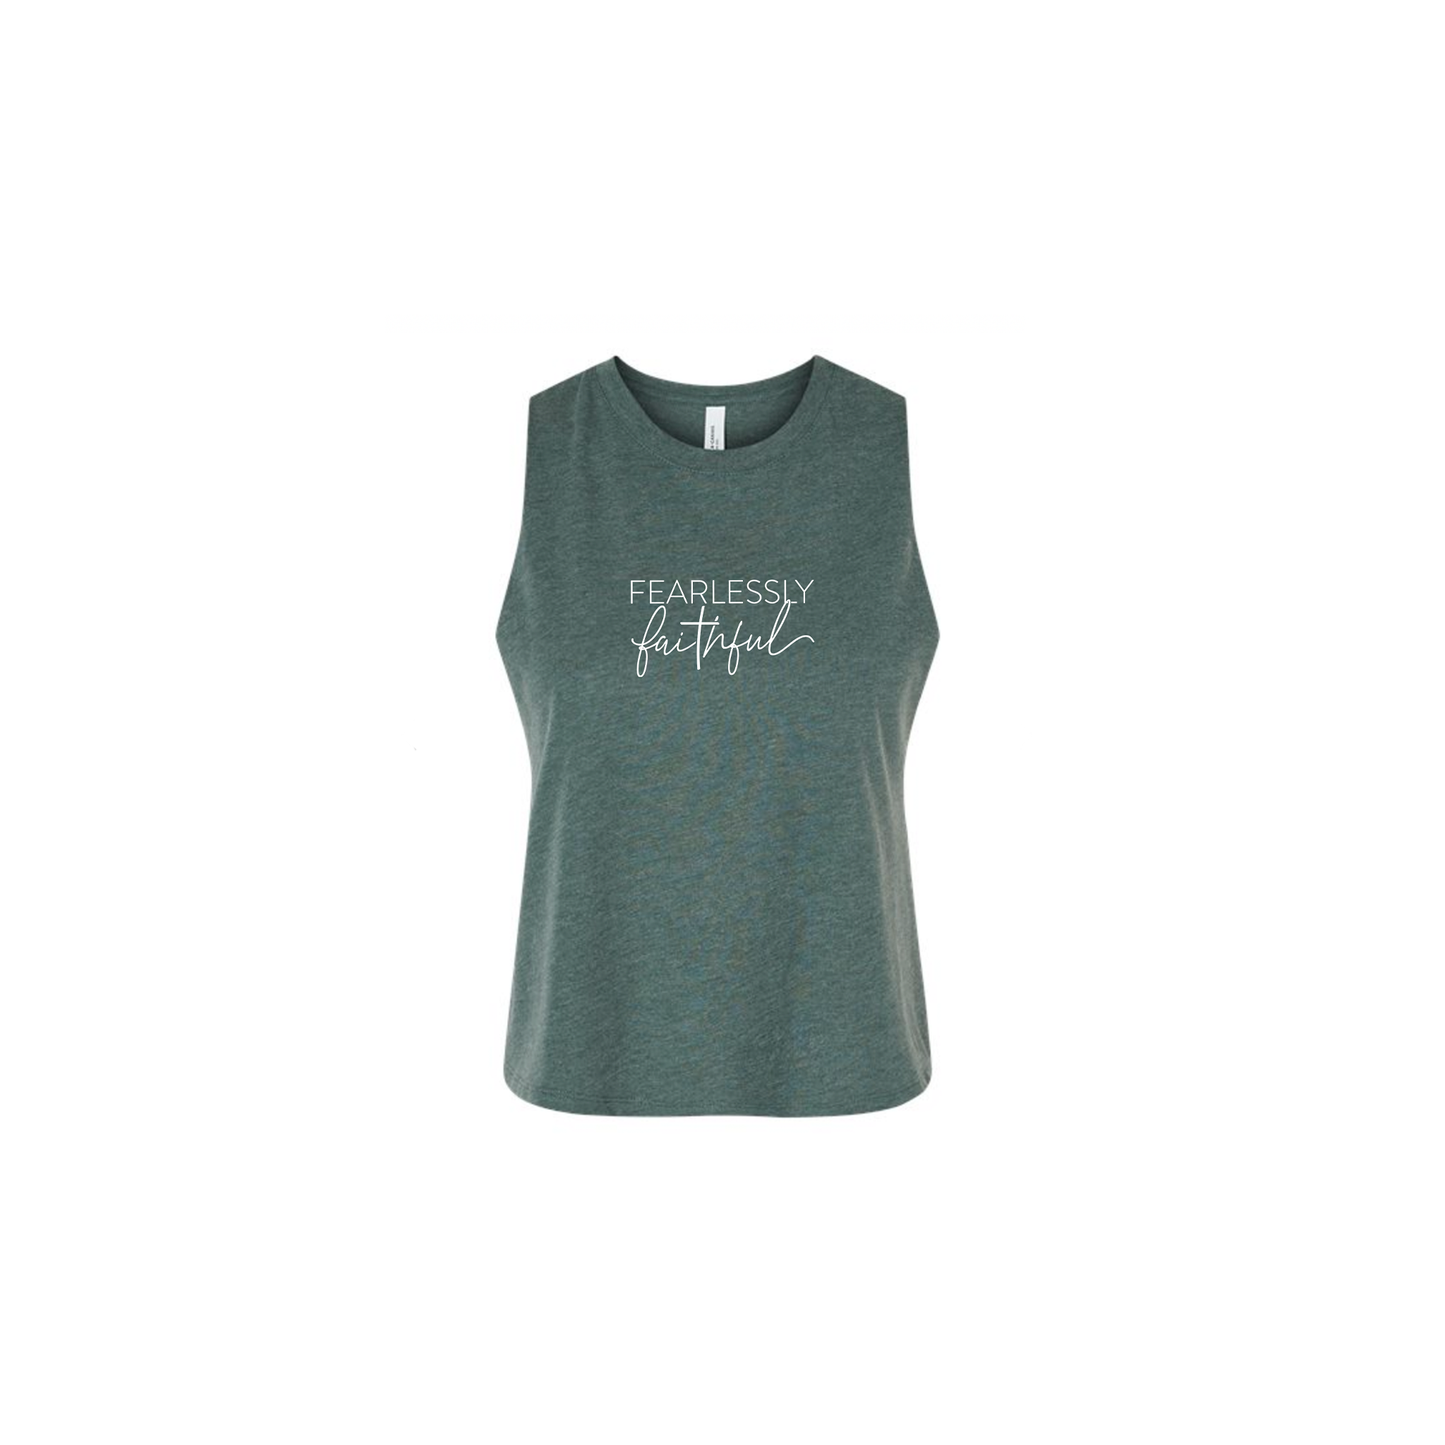 Fearlessly Faithful Cropped Racerback Tanks!!